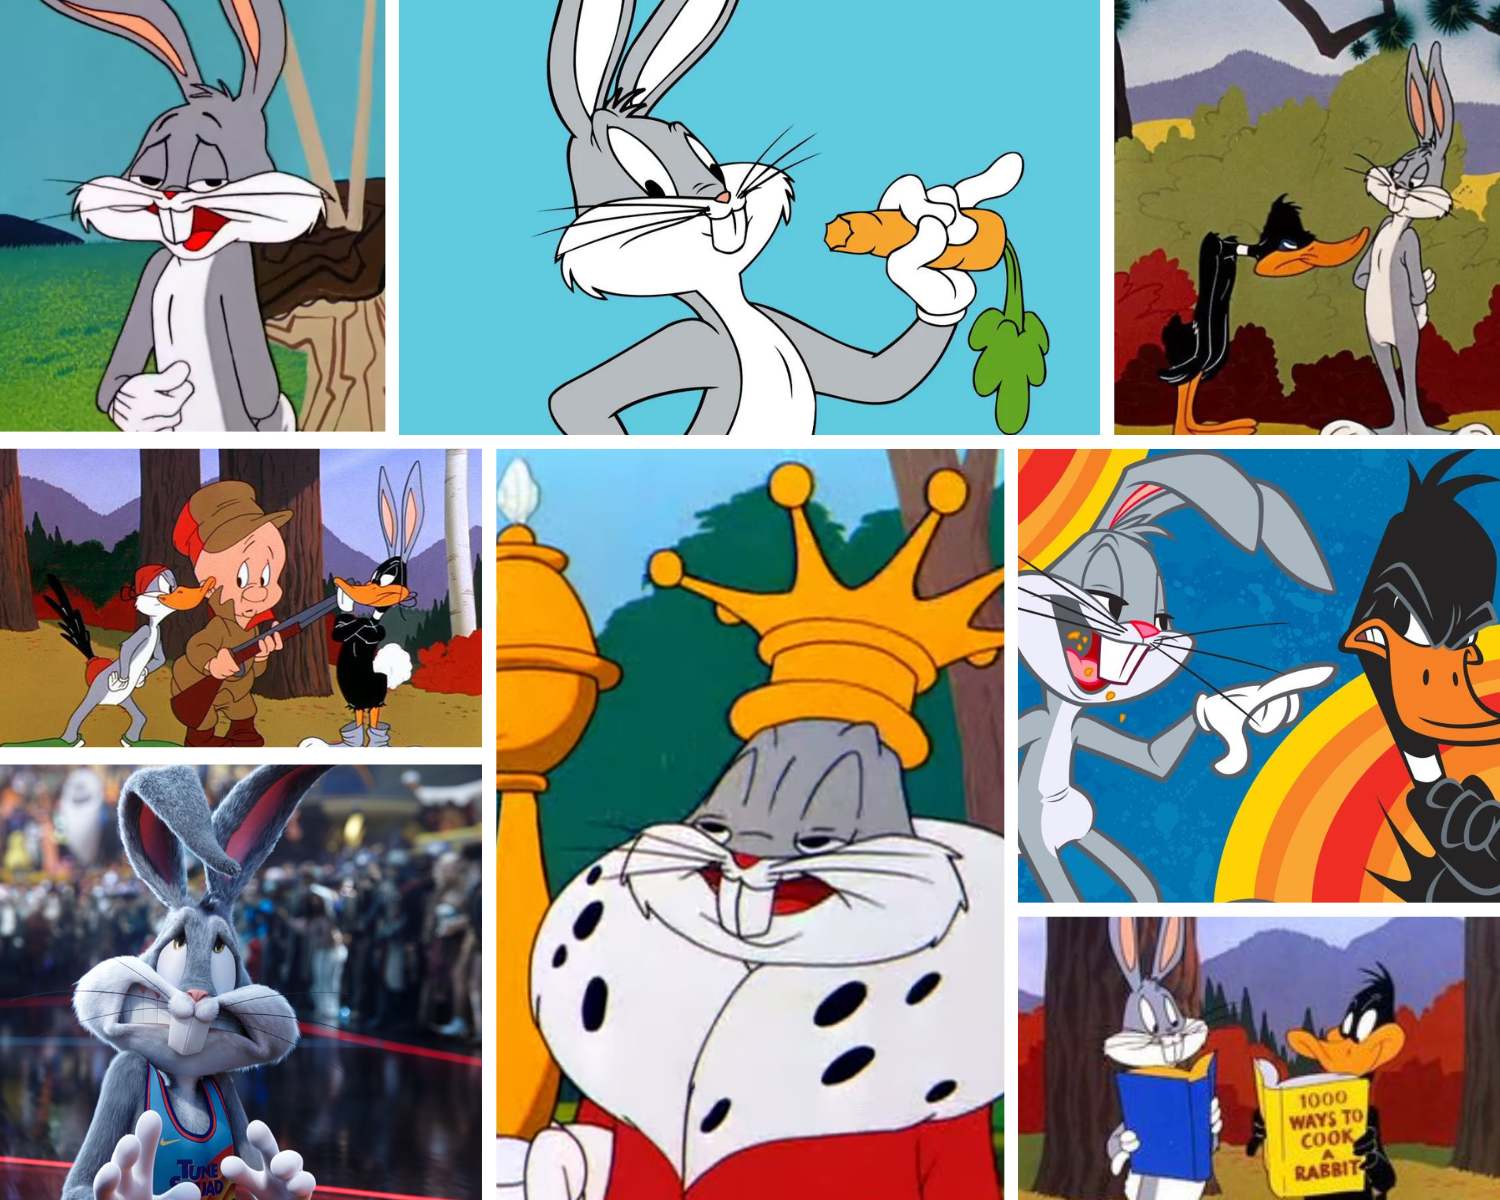 Looney Tunes  Best of Bugs Bunny  Classic Cartoon Compilation  WB Kids   YouTube